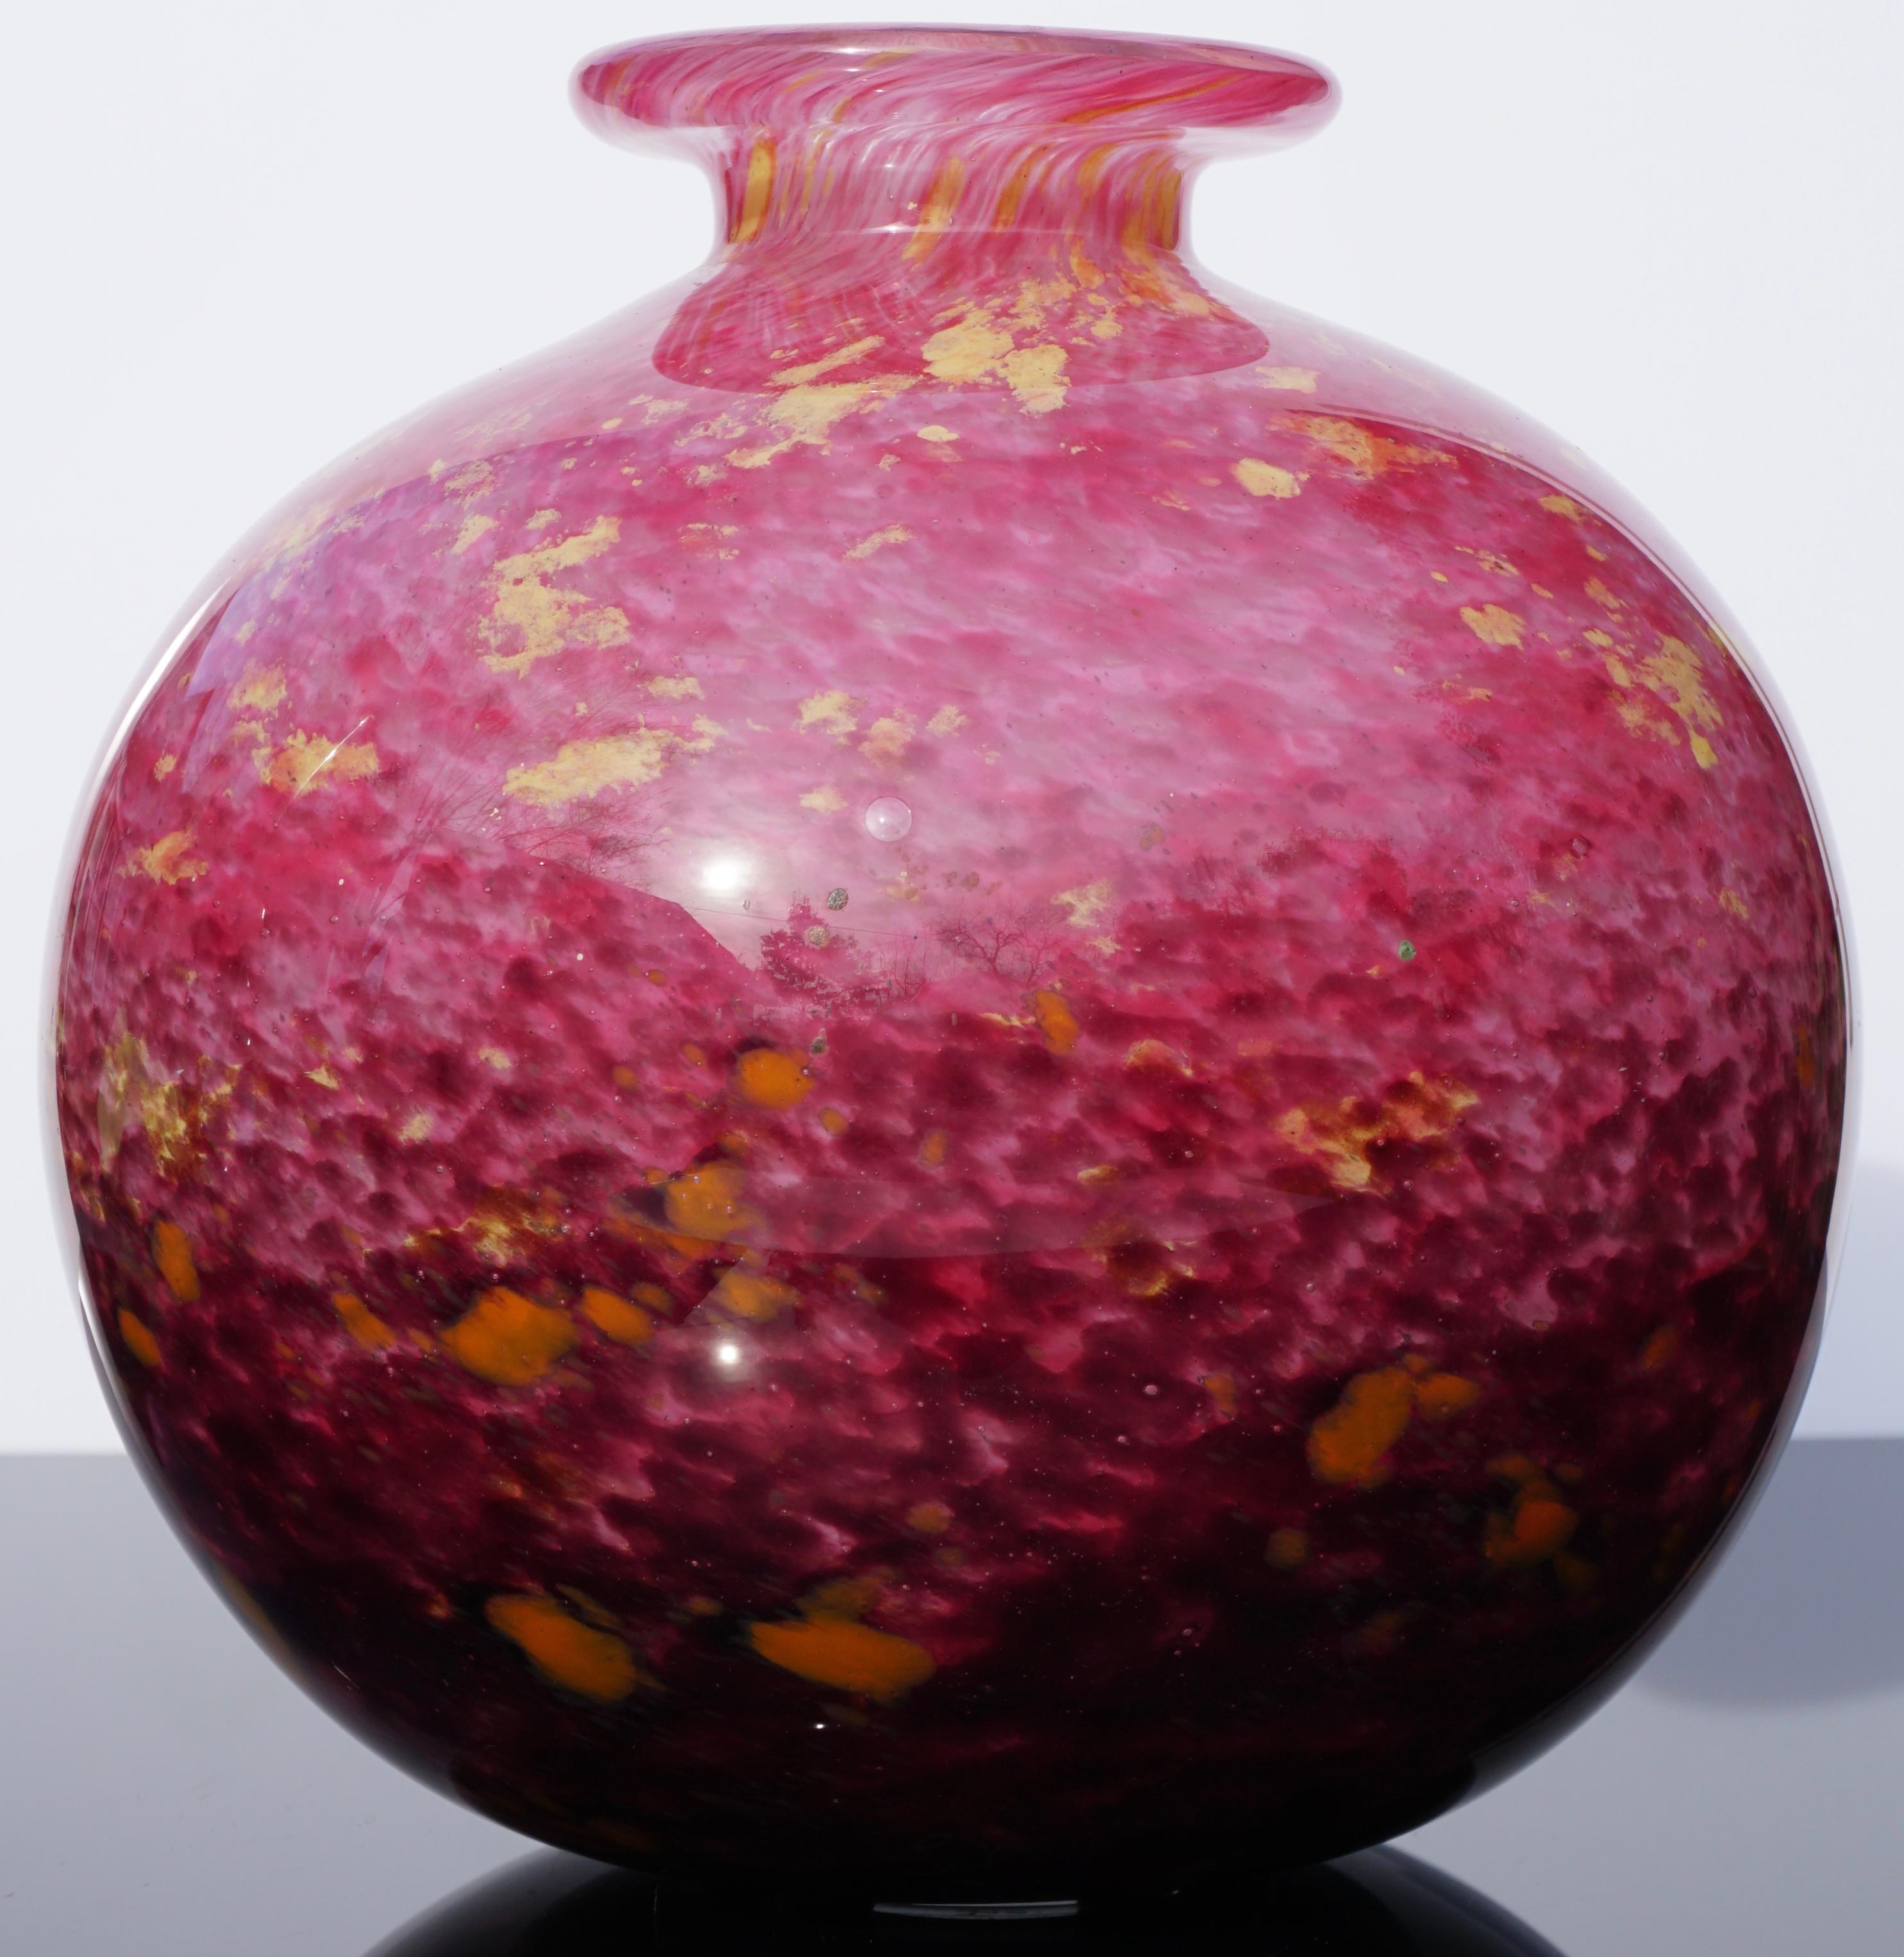 Schneider Glassworks (France, 1917-1981)

Circa 1920. A red, yellow, orange and black Variegated round art glass vase perfect as a center piece on a dining table or side table. French Art Nouveau - Art Deco transition period.

Measures: Height 8